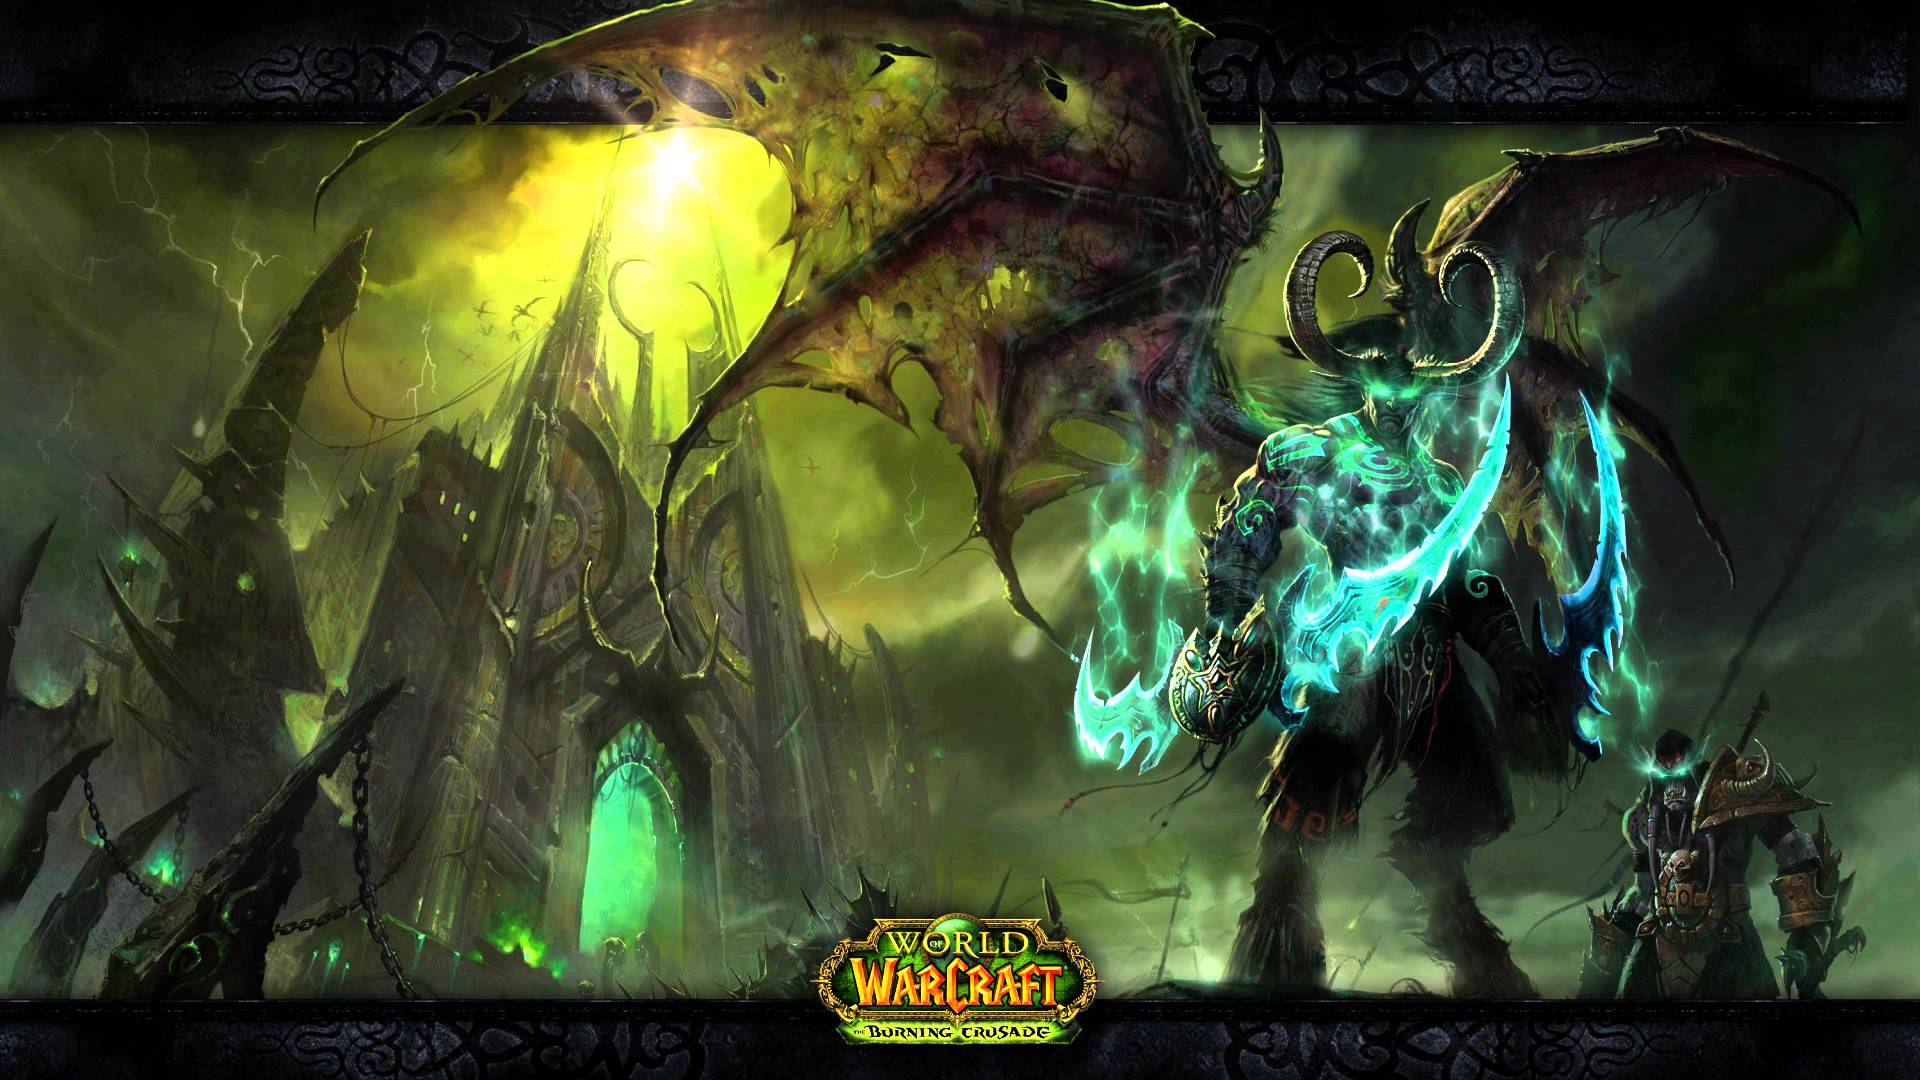 World of Warcraft and the Black Temple